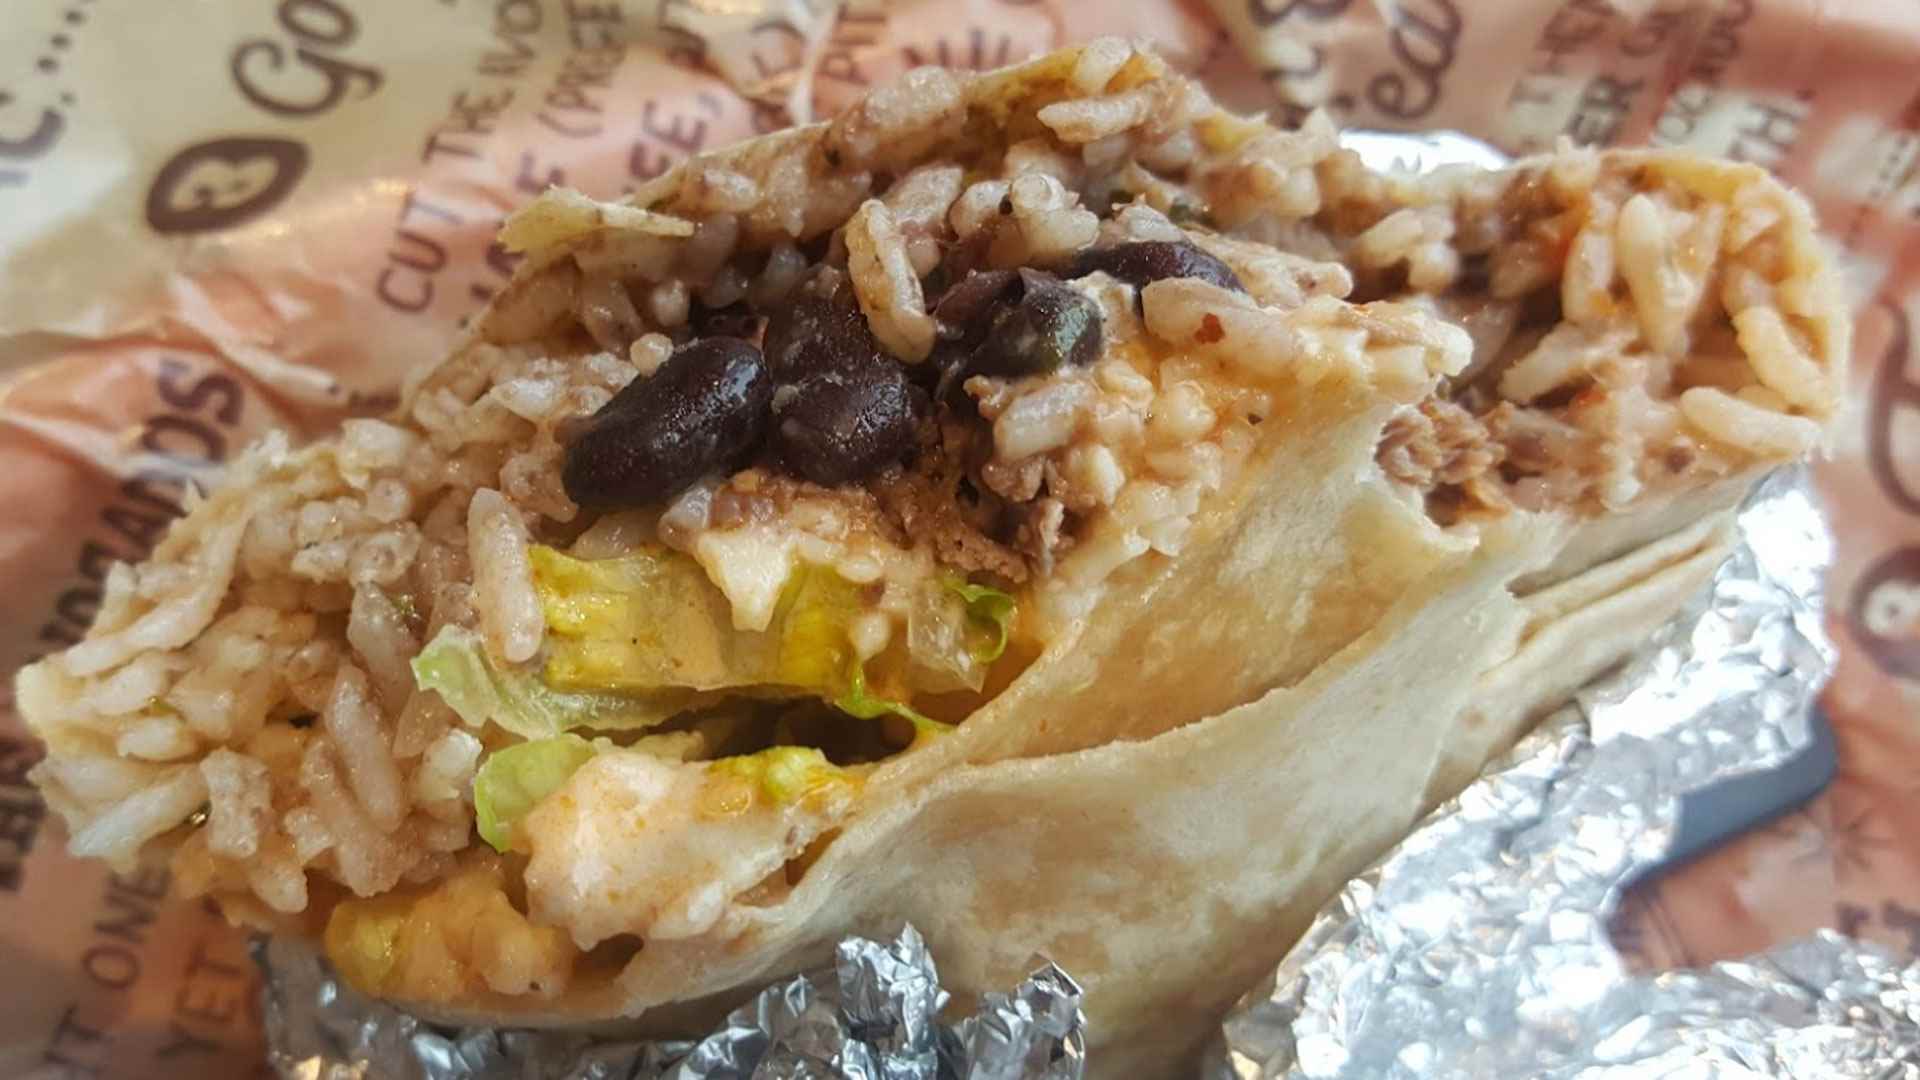 Chipotle Mexican Grill/